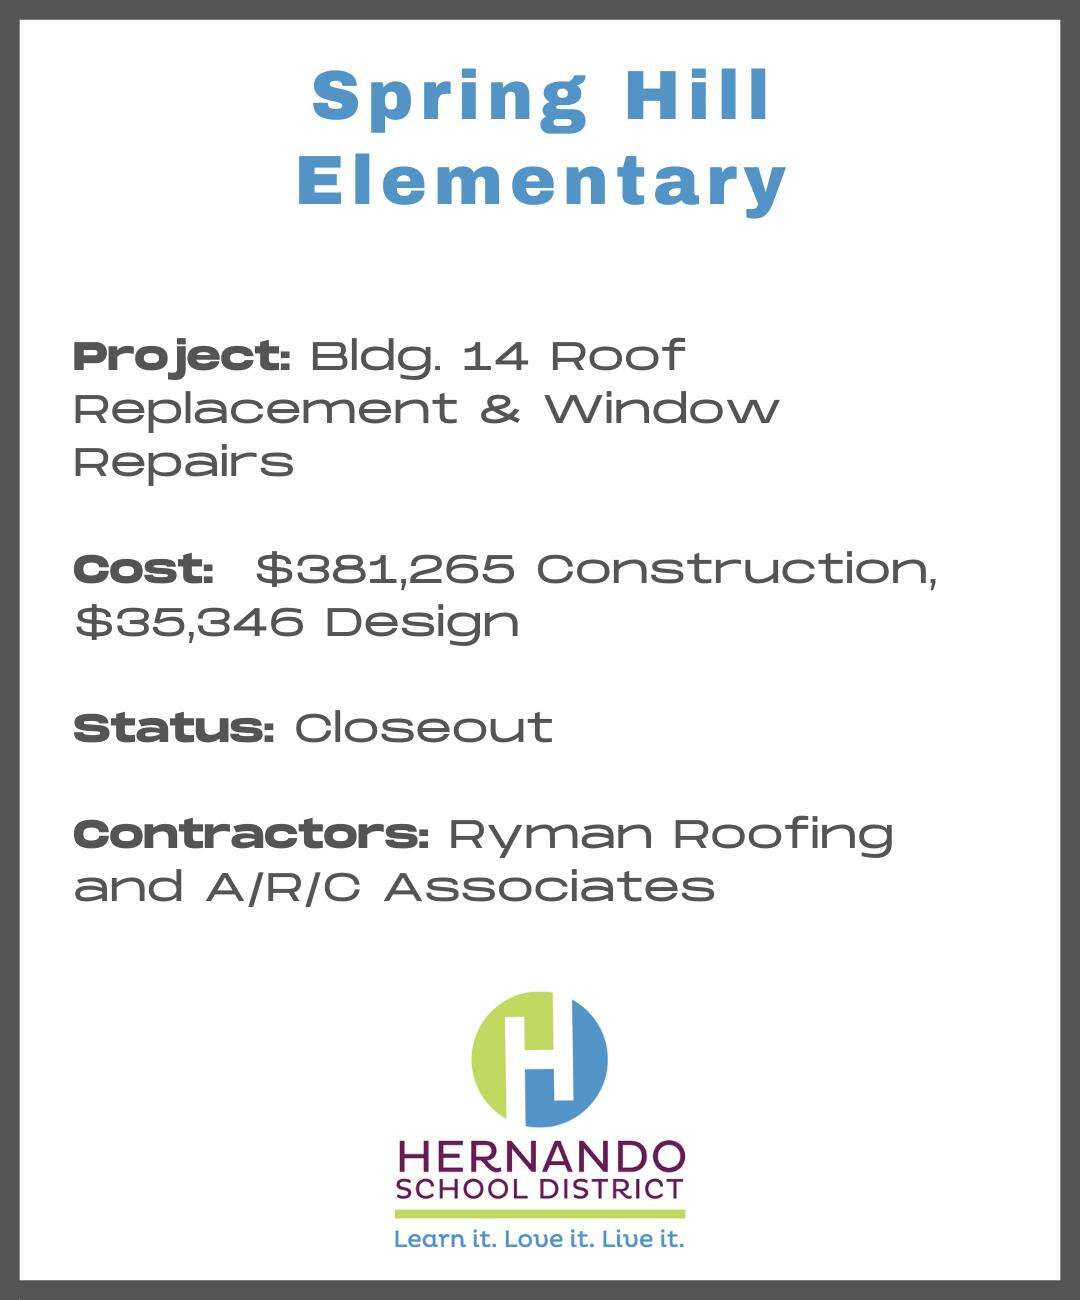 SHES Roof Replacement & Window Repairs graphic